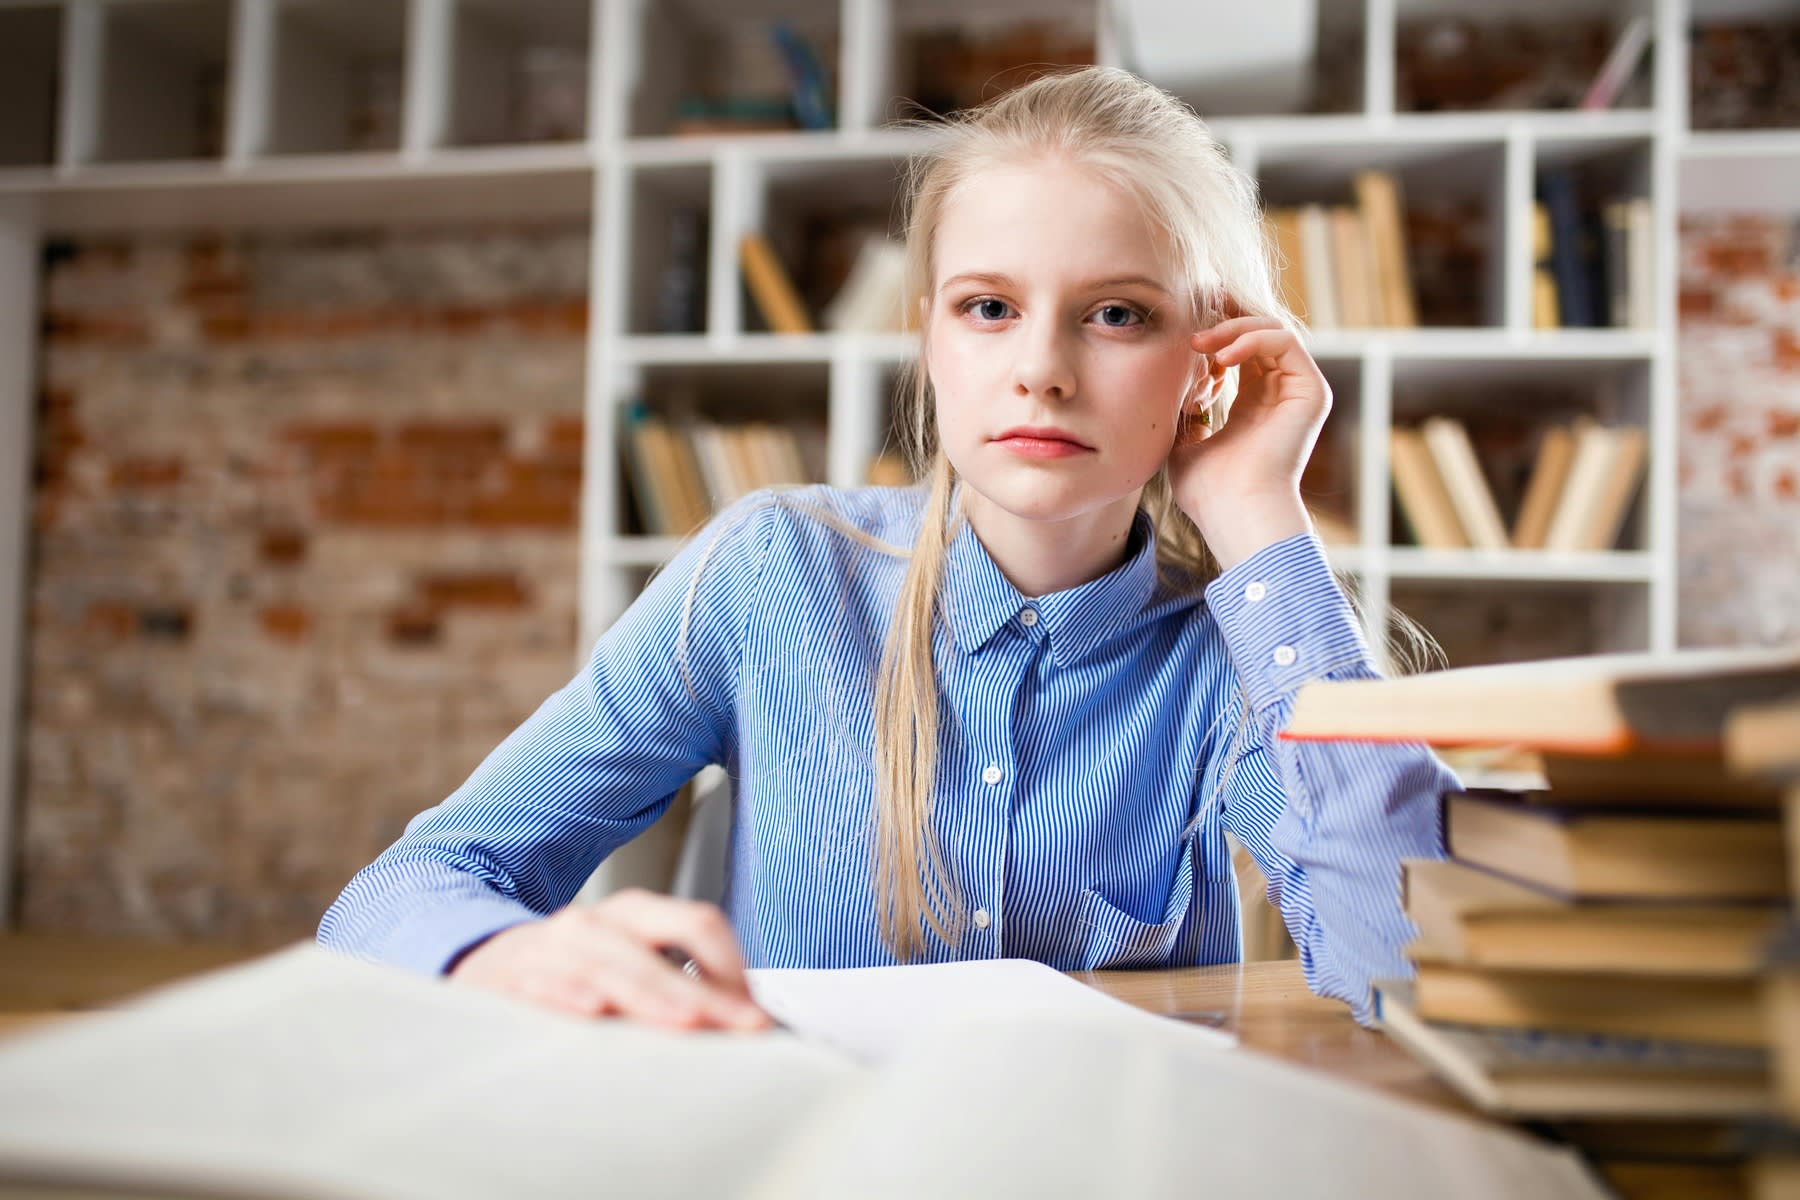 Female student looking serious while a stack of books are on her desk table